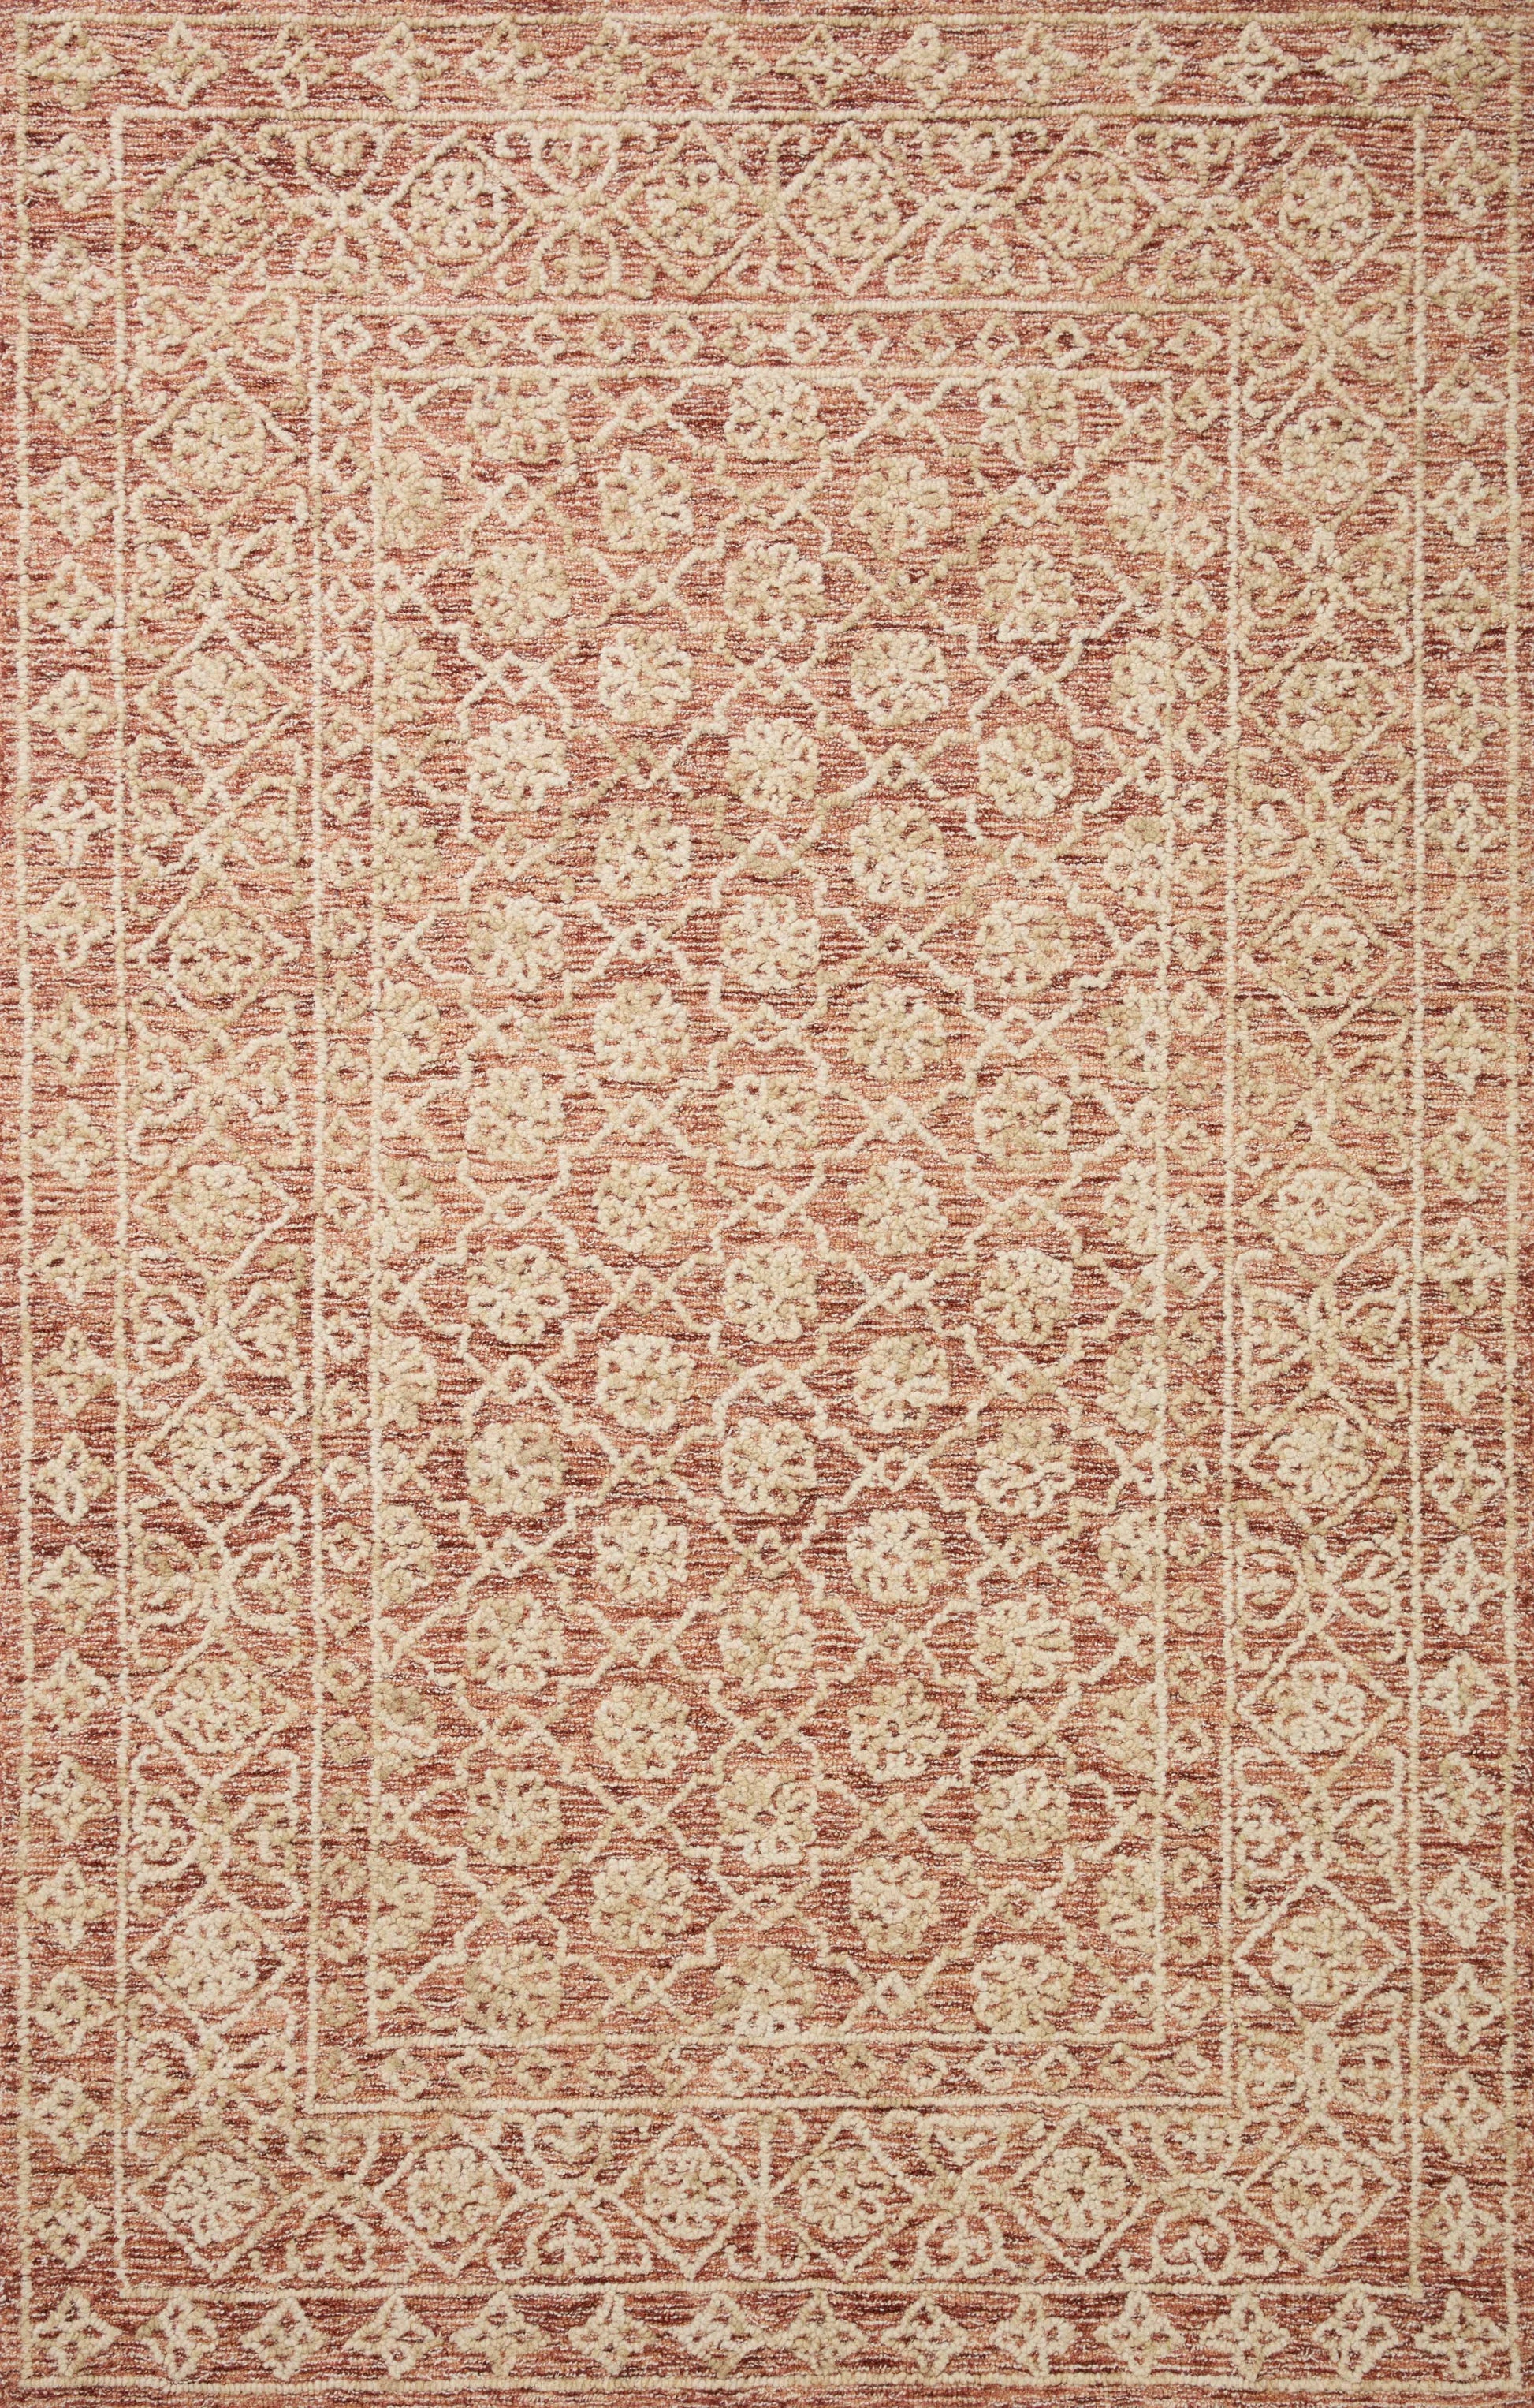 A picture of Loloi's Cecelia rug, in style CEC-01, color Rust / Natural